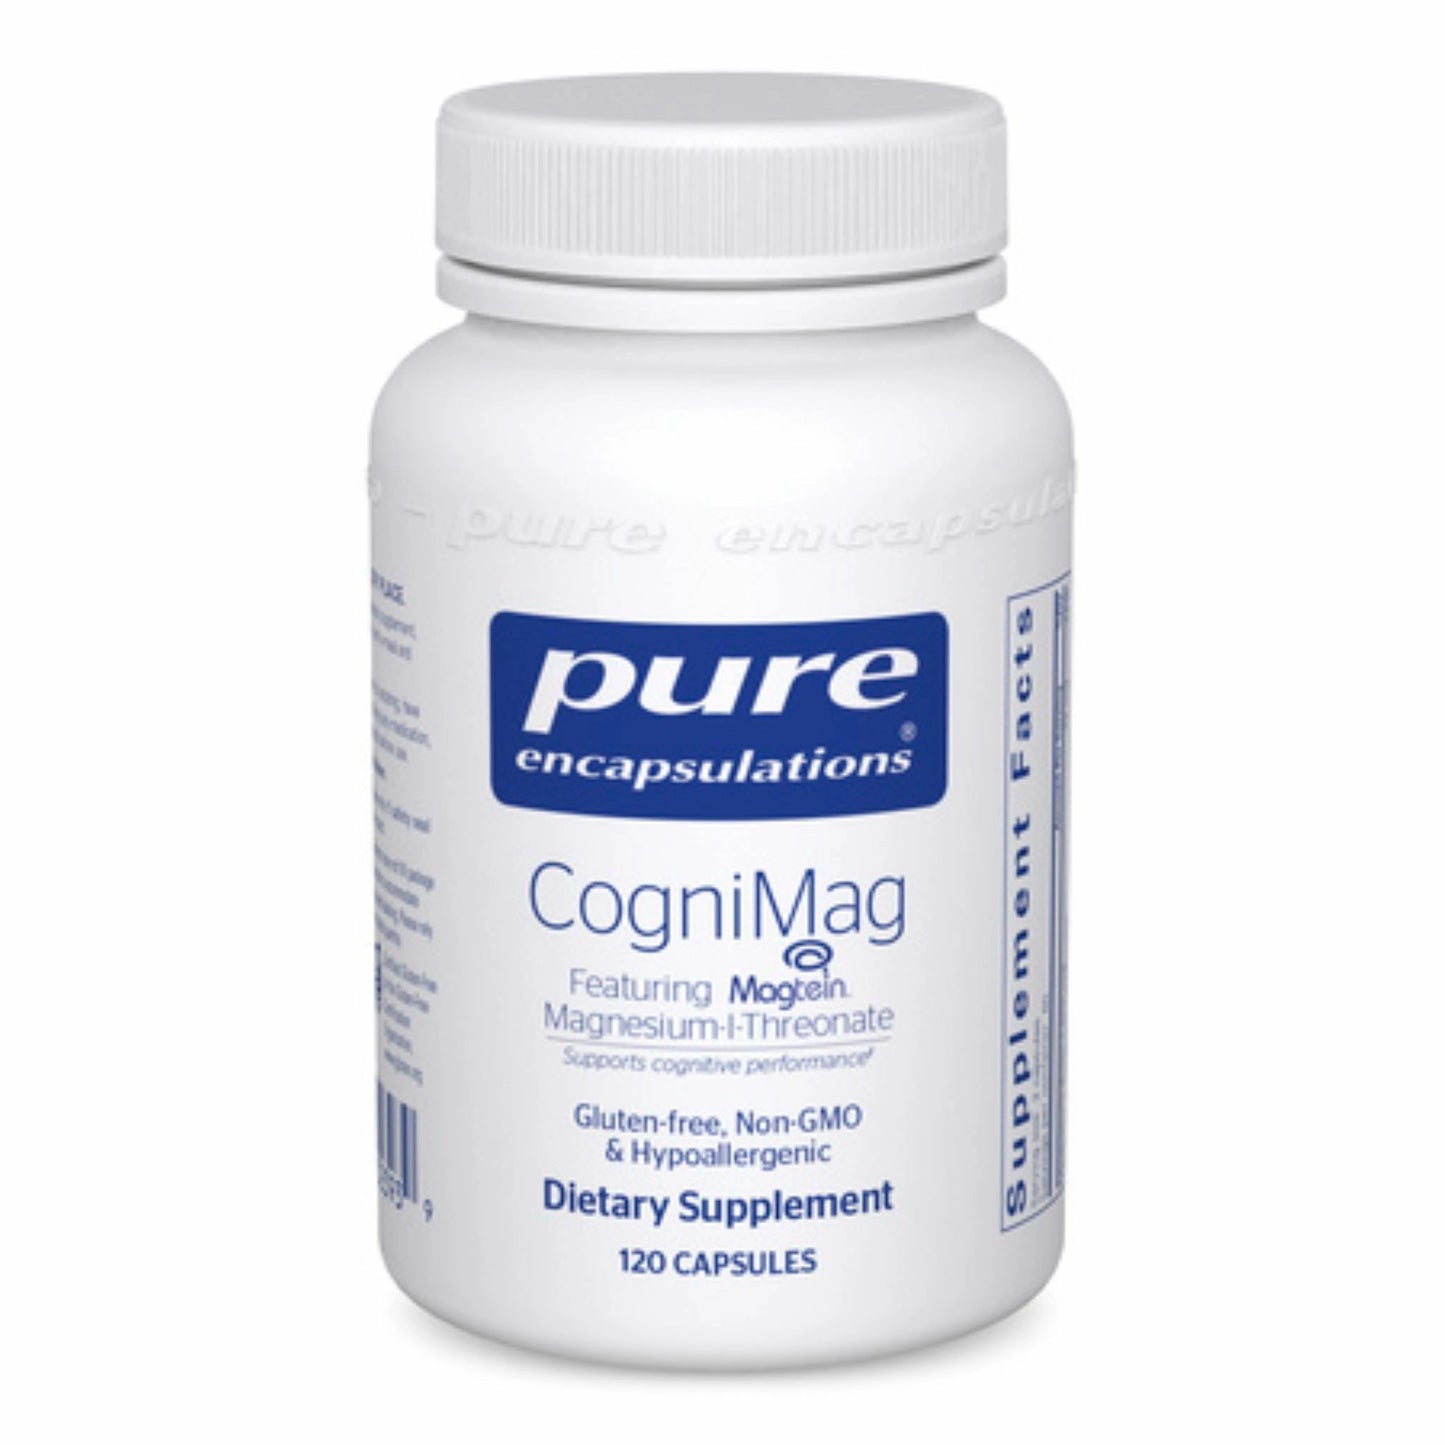 Pure Encapsulations - CogniMag (with Magtein), 120 caps